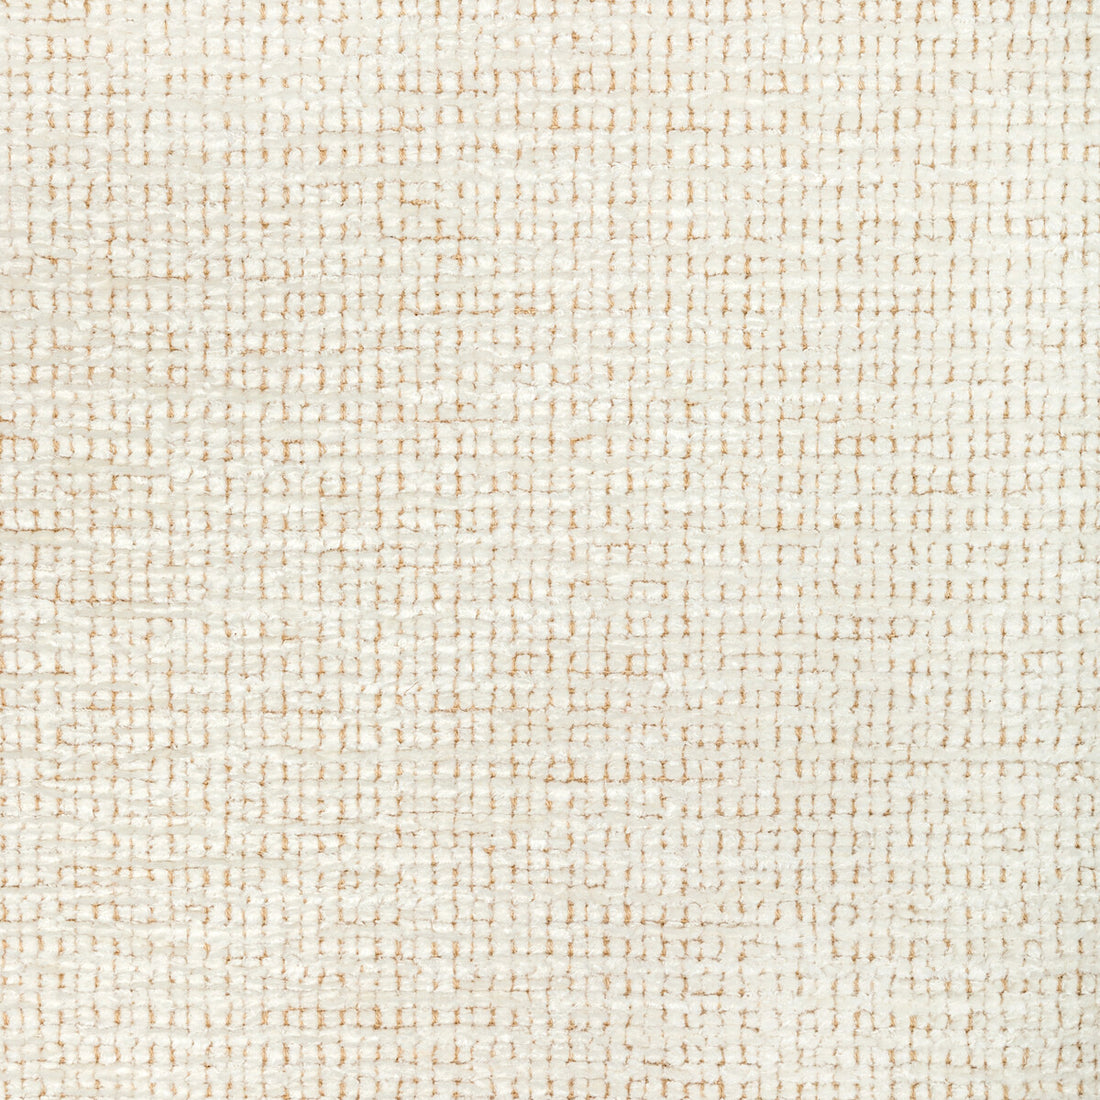 Lemenc Texture fabric in ivory color - pattern 8022124.1.0 - by Brunschwig &amp; Fils in the Chambery Textures III collection